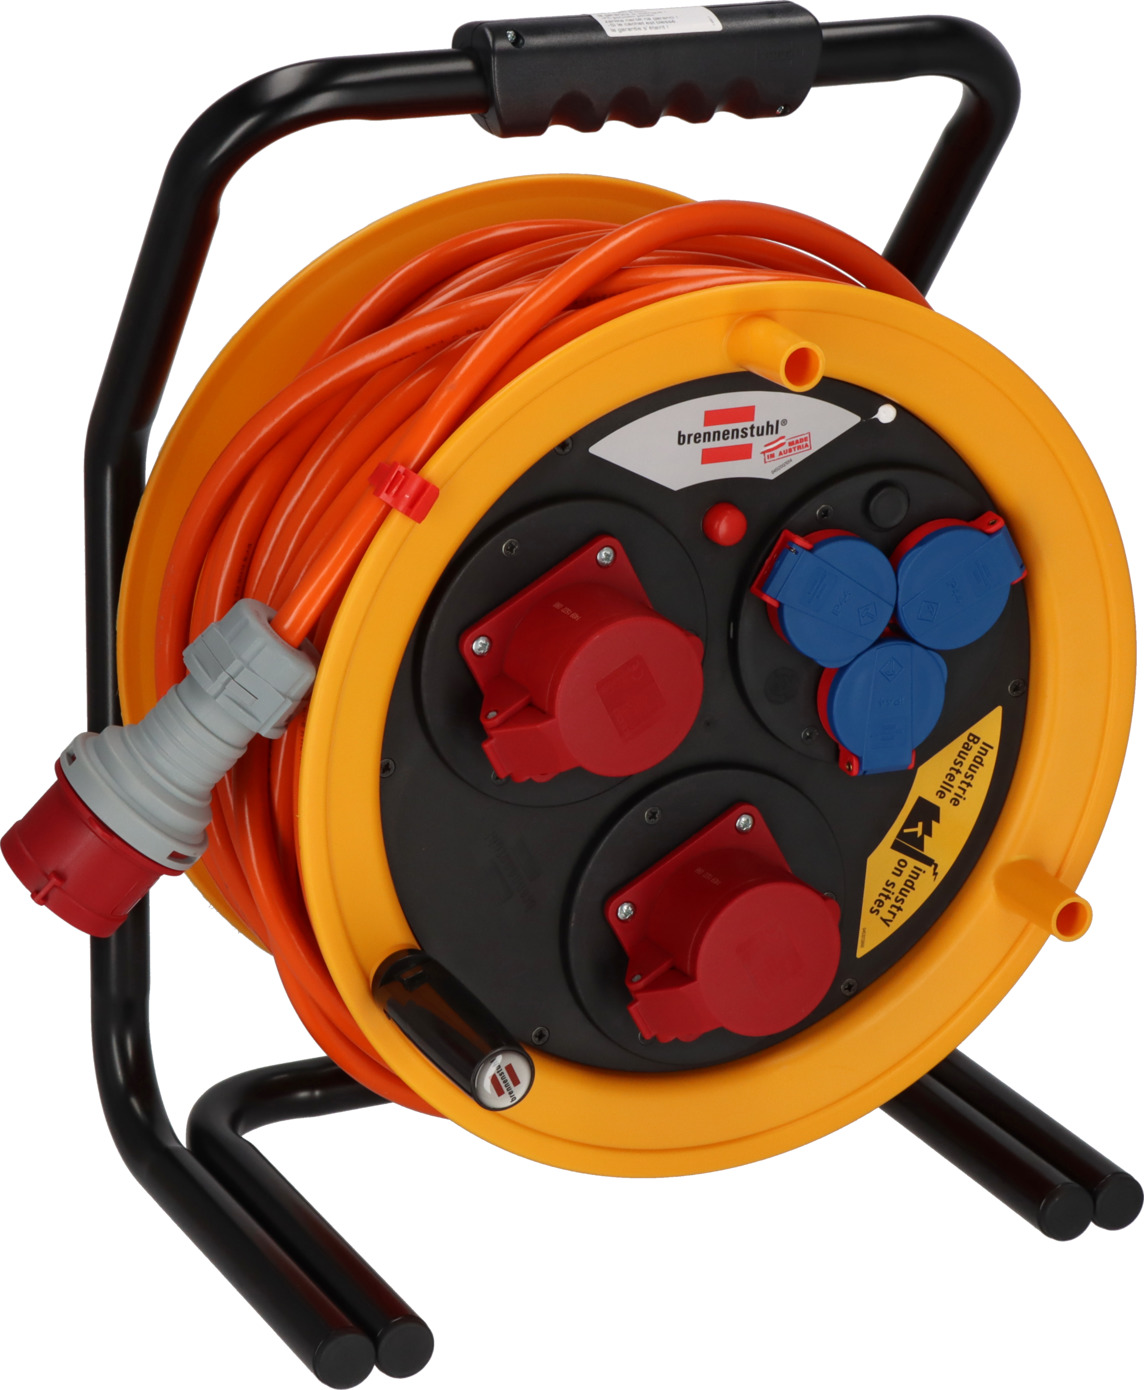 Brobusta CEE cable drum 380, 2x CEE 400V/16A, 3x protective contact sockets  230V/16A, 40m AT-N07V3V3-F 5G2,5 orange, IP44